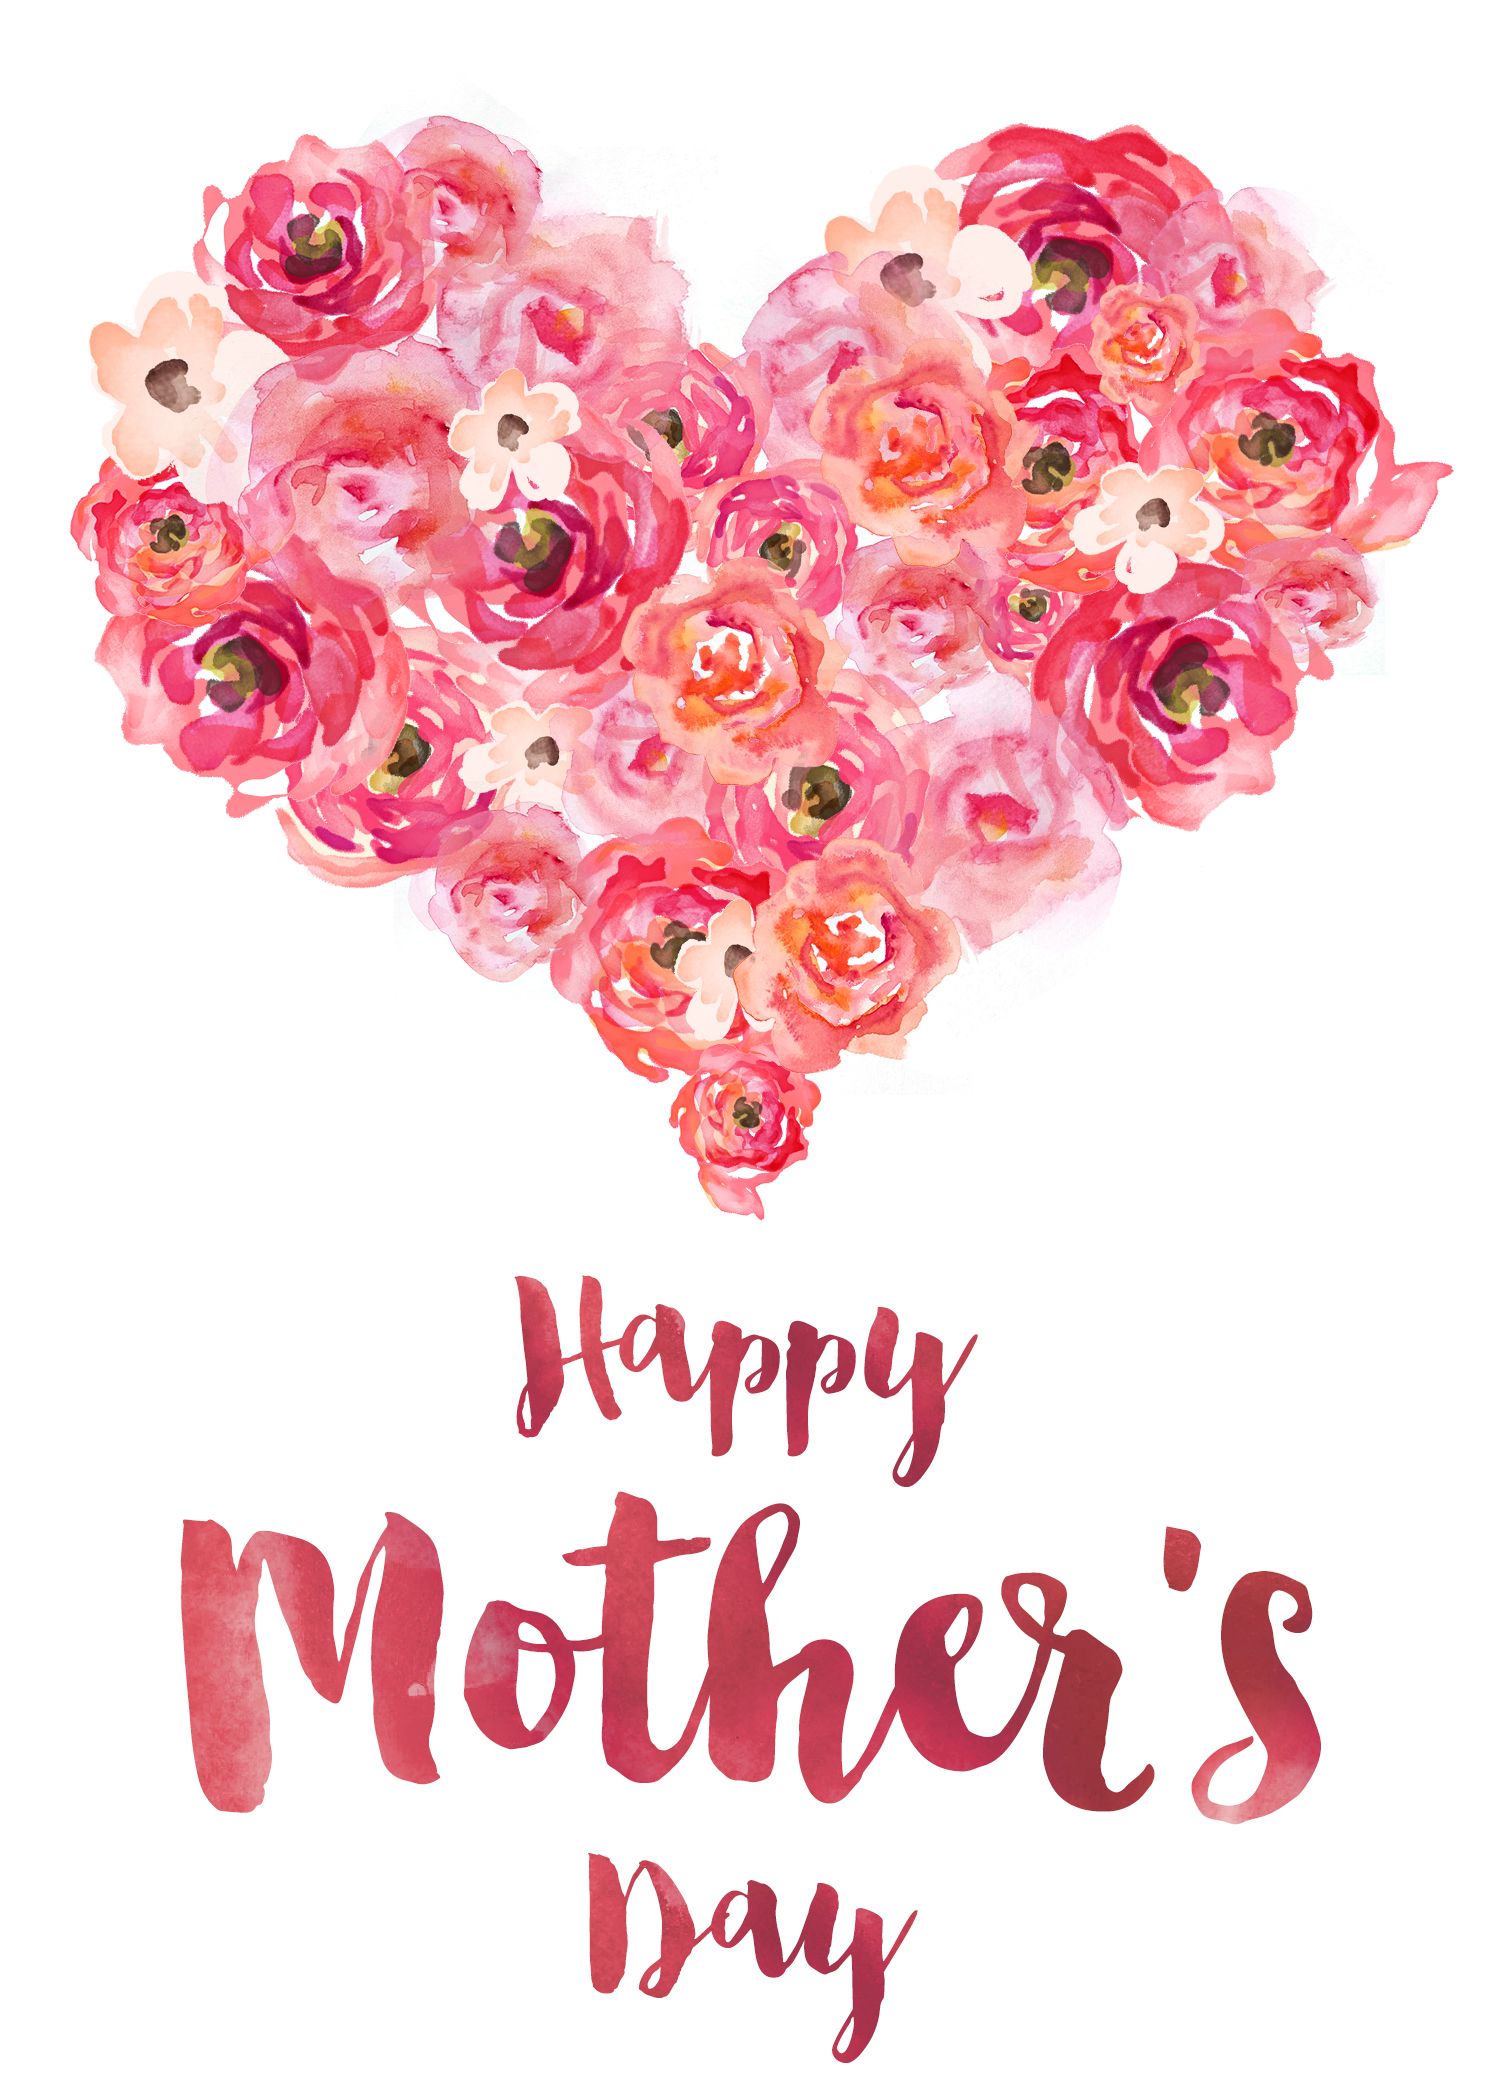 Happy Mother's Day! - Wright Center for Women's Health